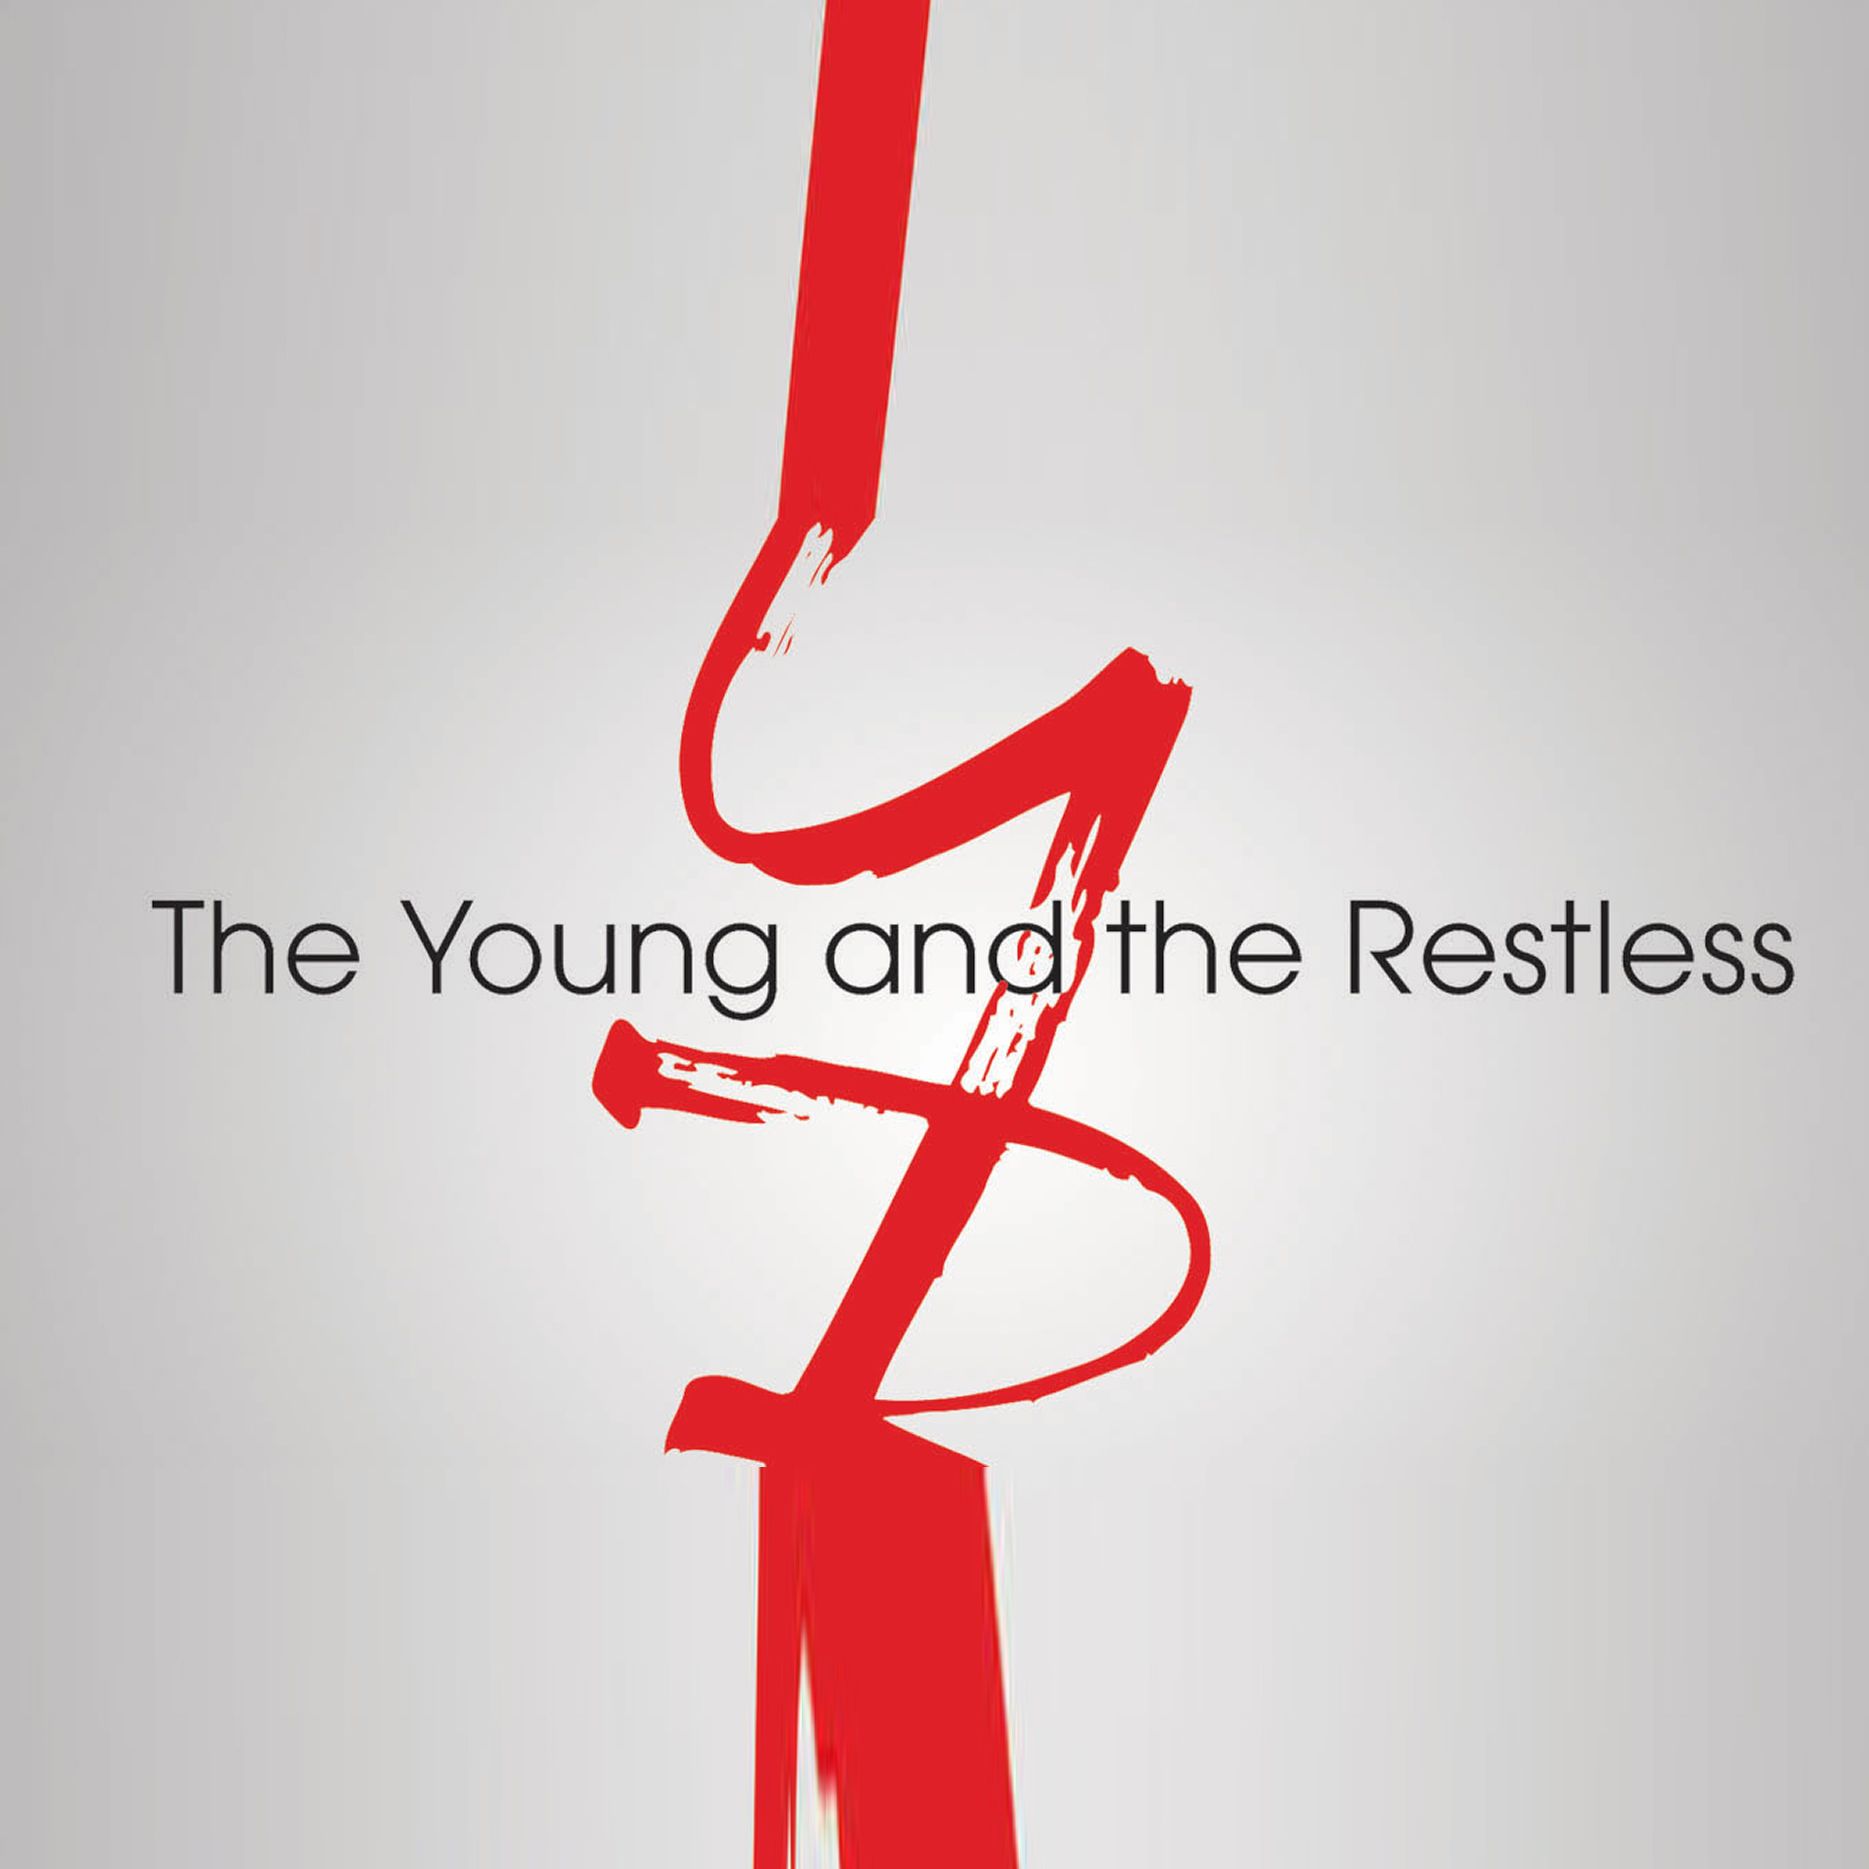 The Young And The Restless